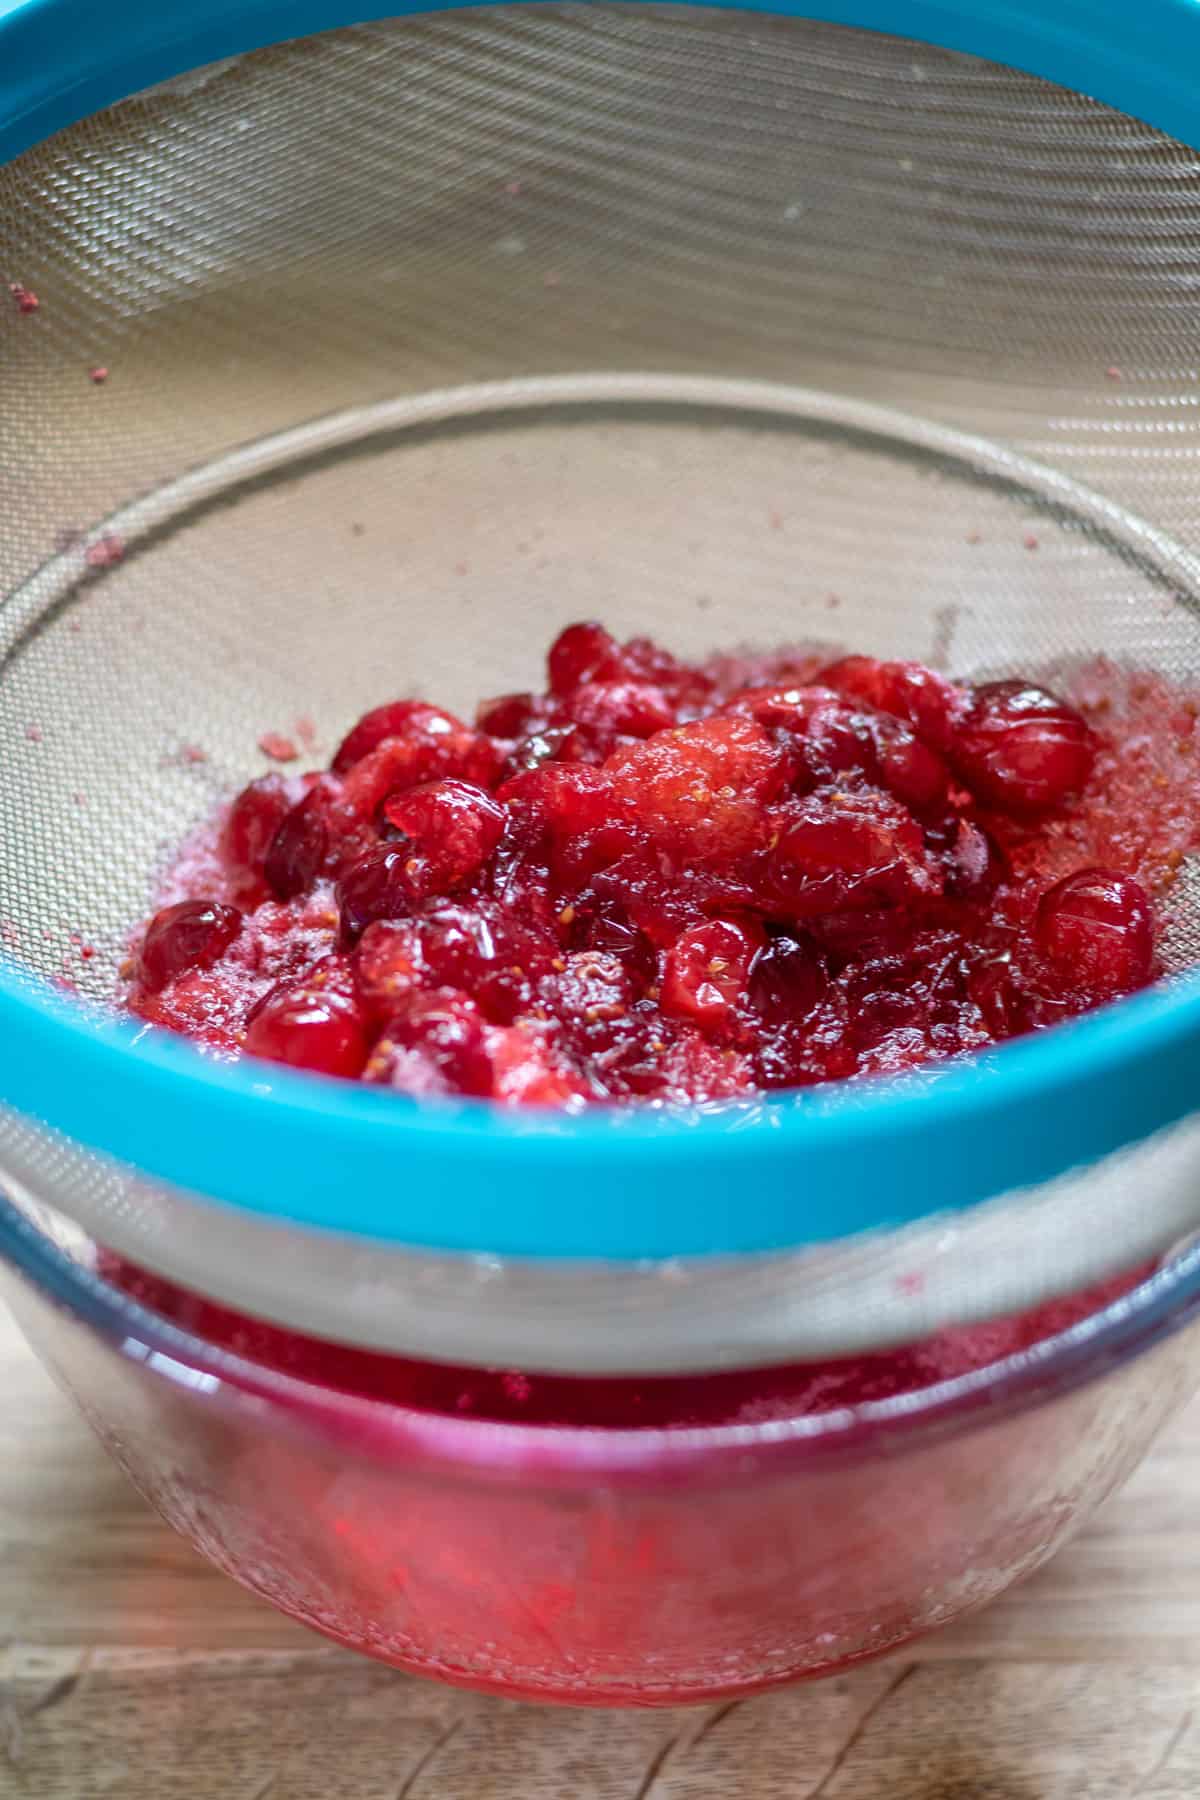 Straining the cranberries out of the cranberry syrup.